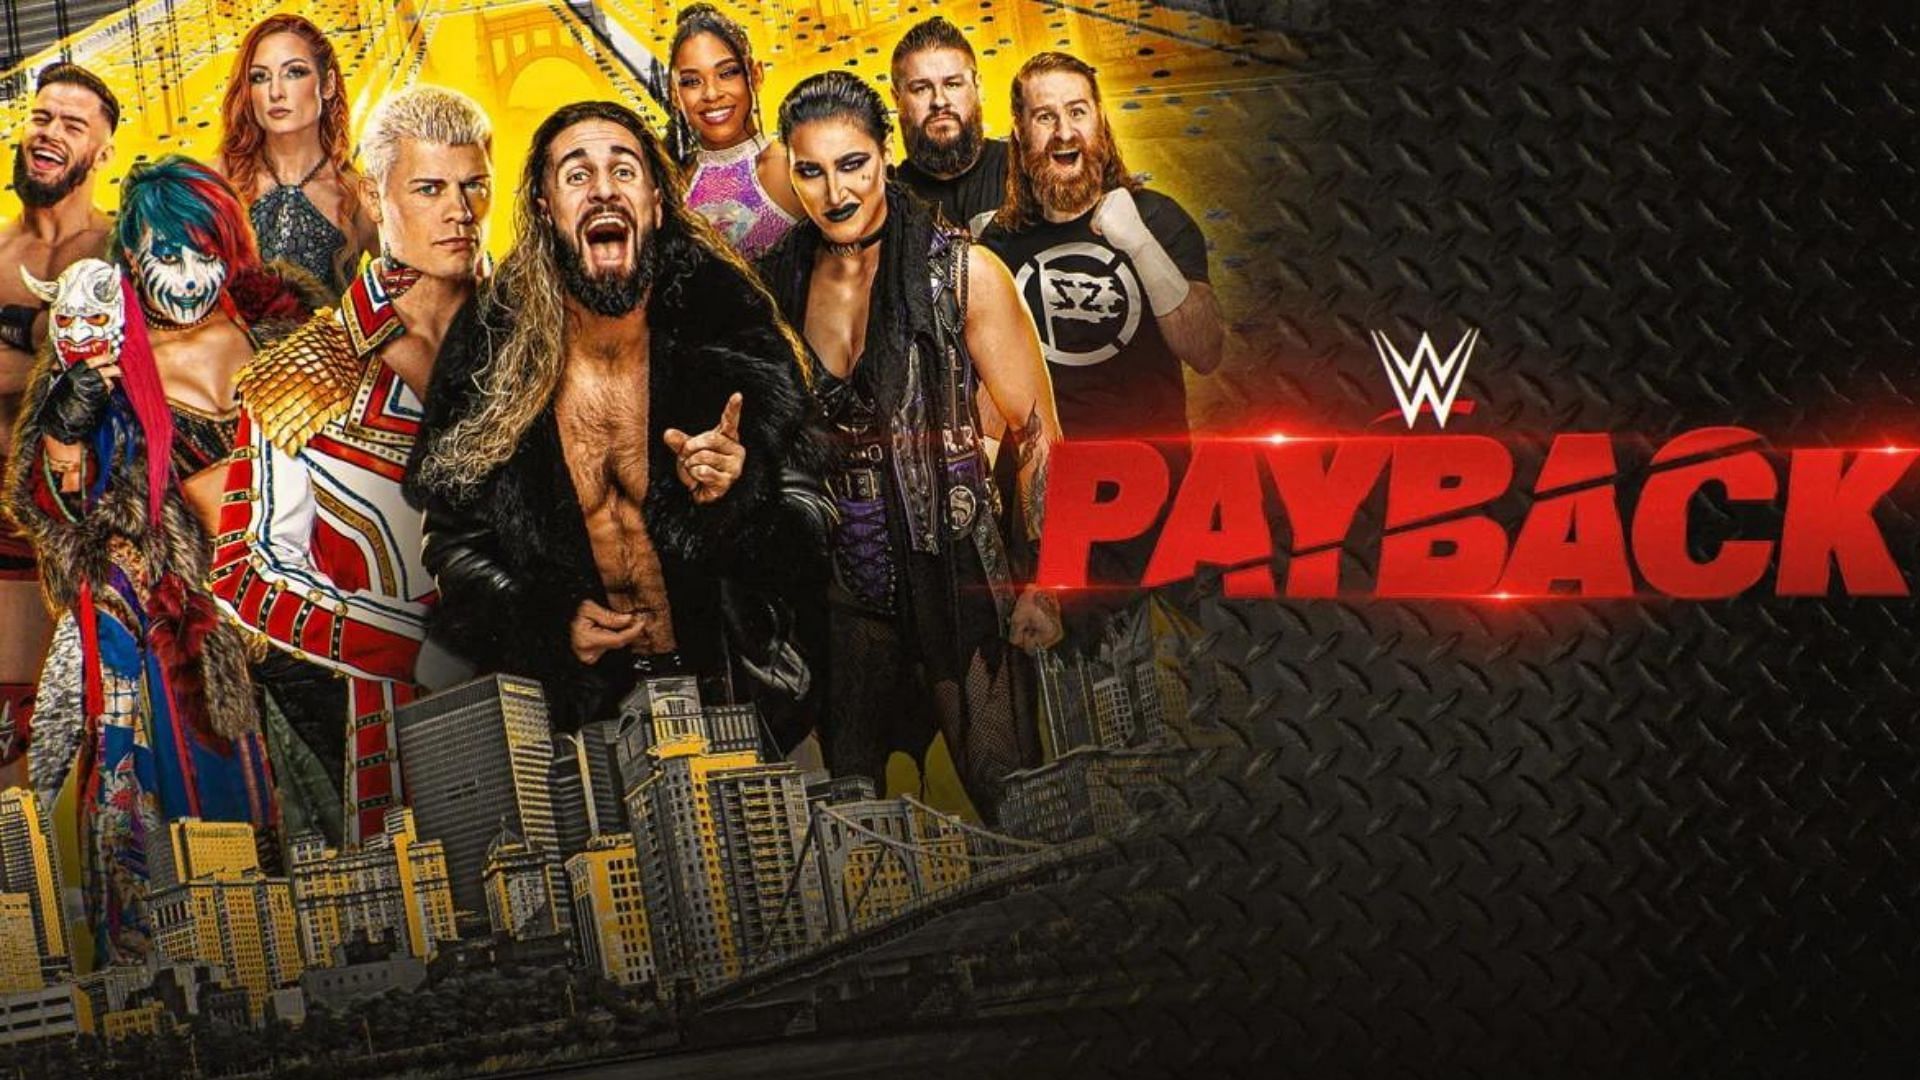 Payback will air on September 2nd. 